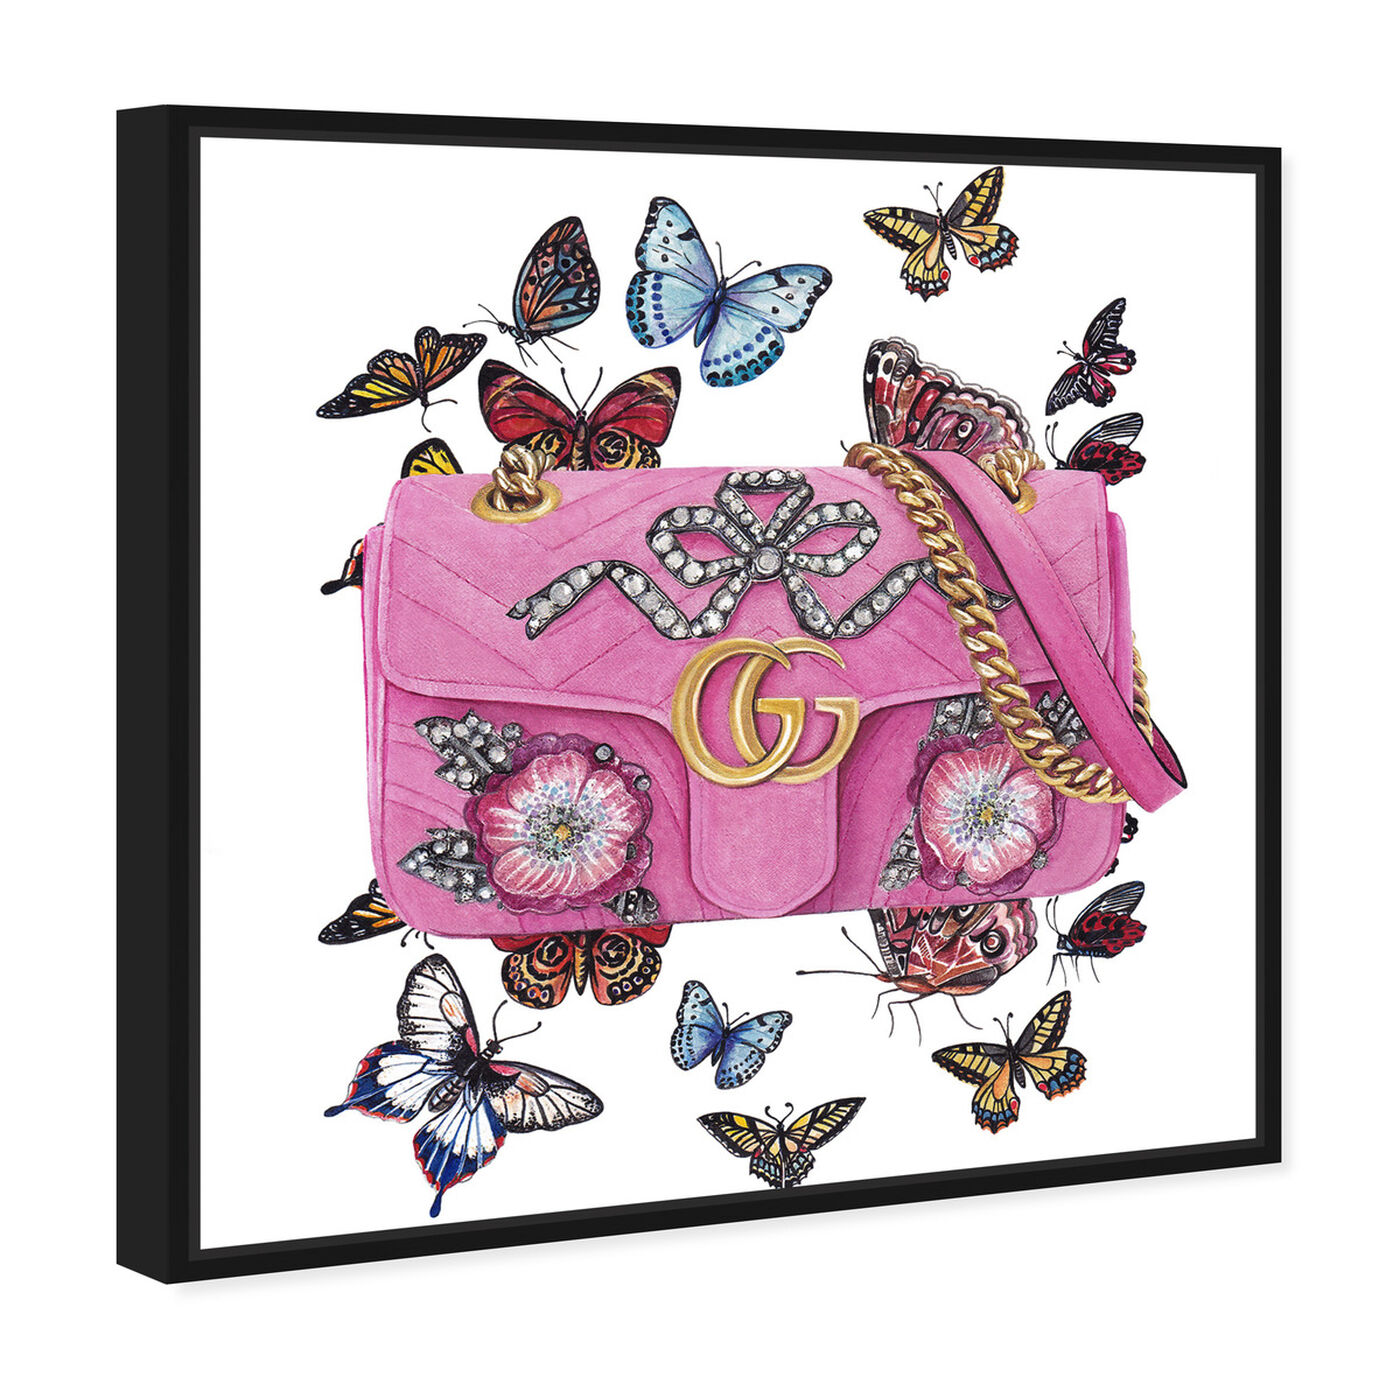 Angled view of Doll Memories - Butterfly Bag featuring fashion and glam and handbags art.